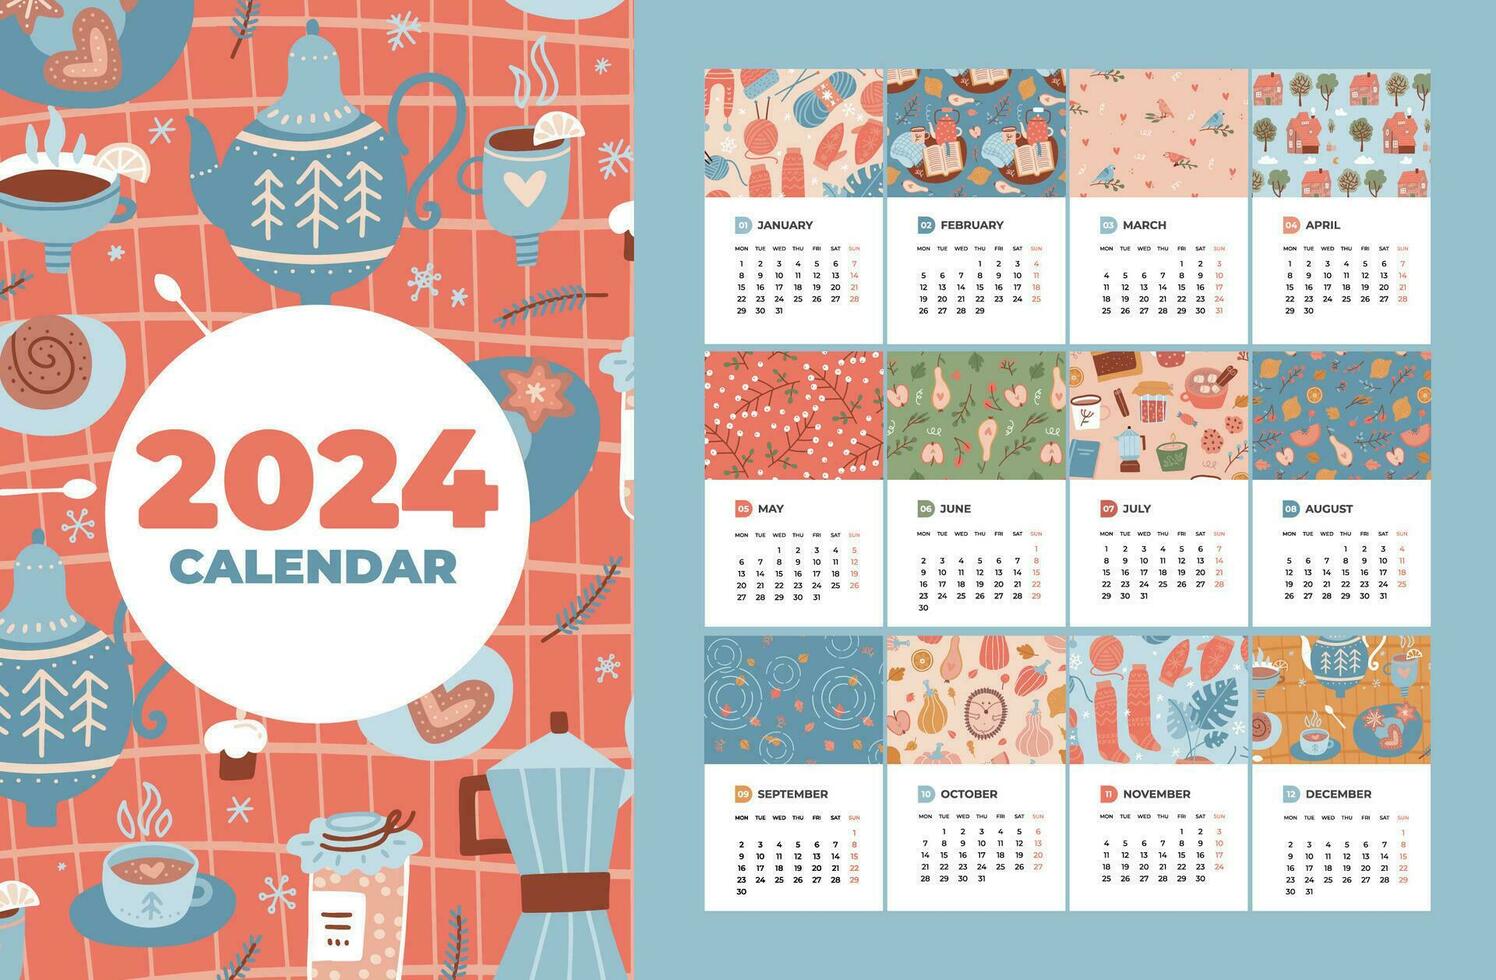 2024 calendar template set with 12 months pages and cover. Pieces of papers with colorful cozy seasons elements patterns in flat style. Week starts on Monday. Vector hand drawn illustration.